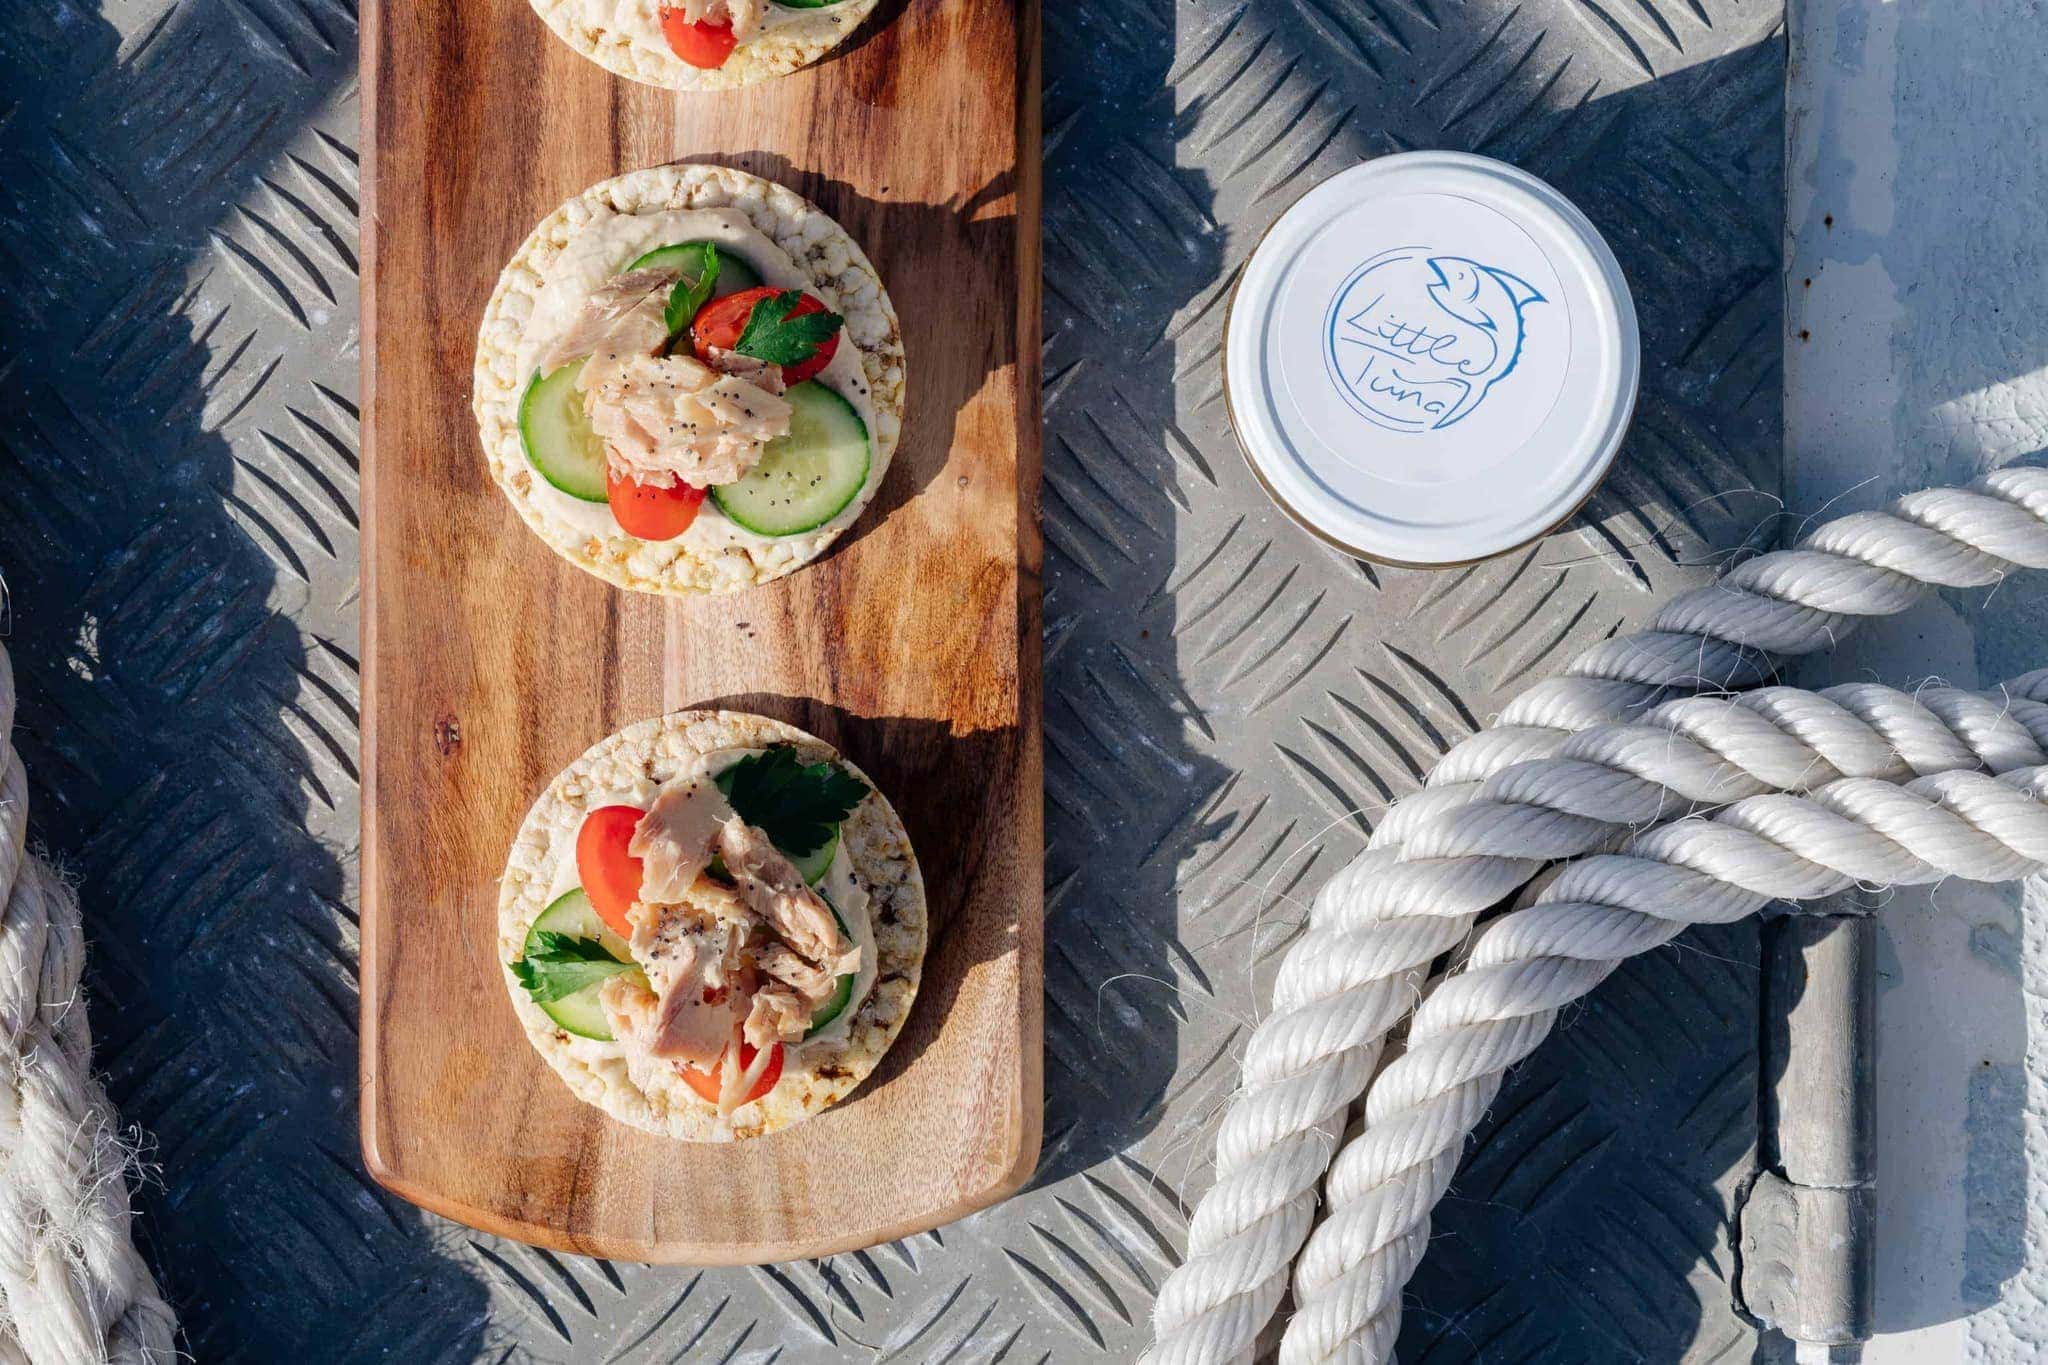 Each jar of Little Tuna is made with fresh ingredients. Photo by Sheridan Lindee.